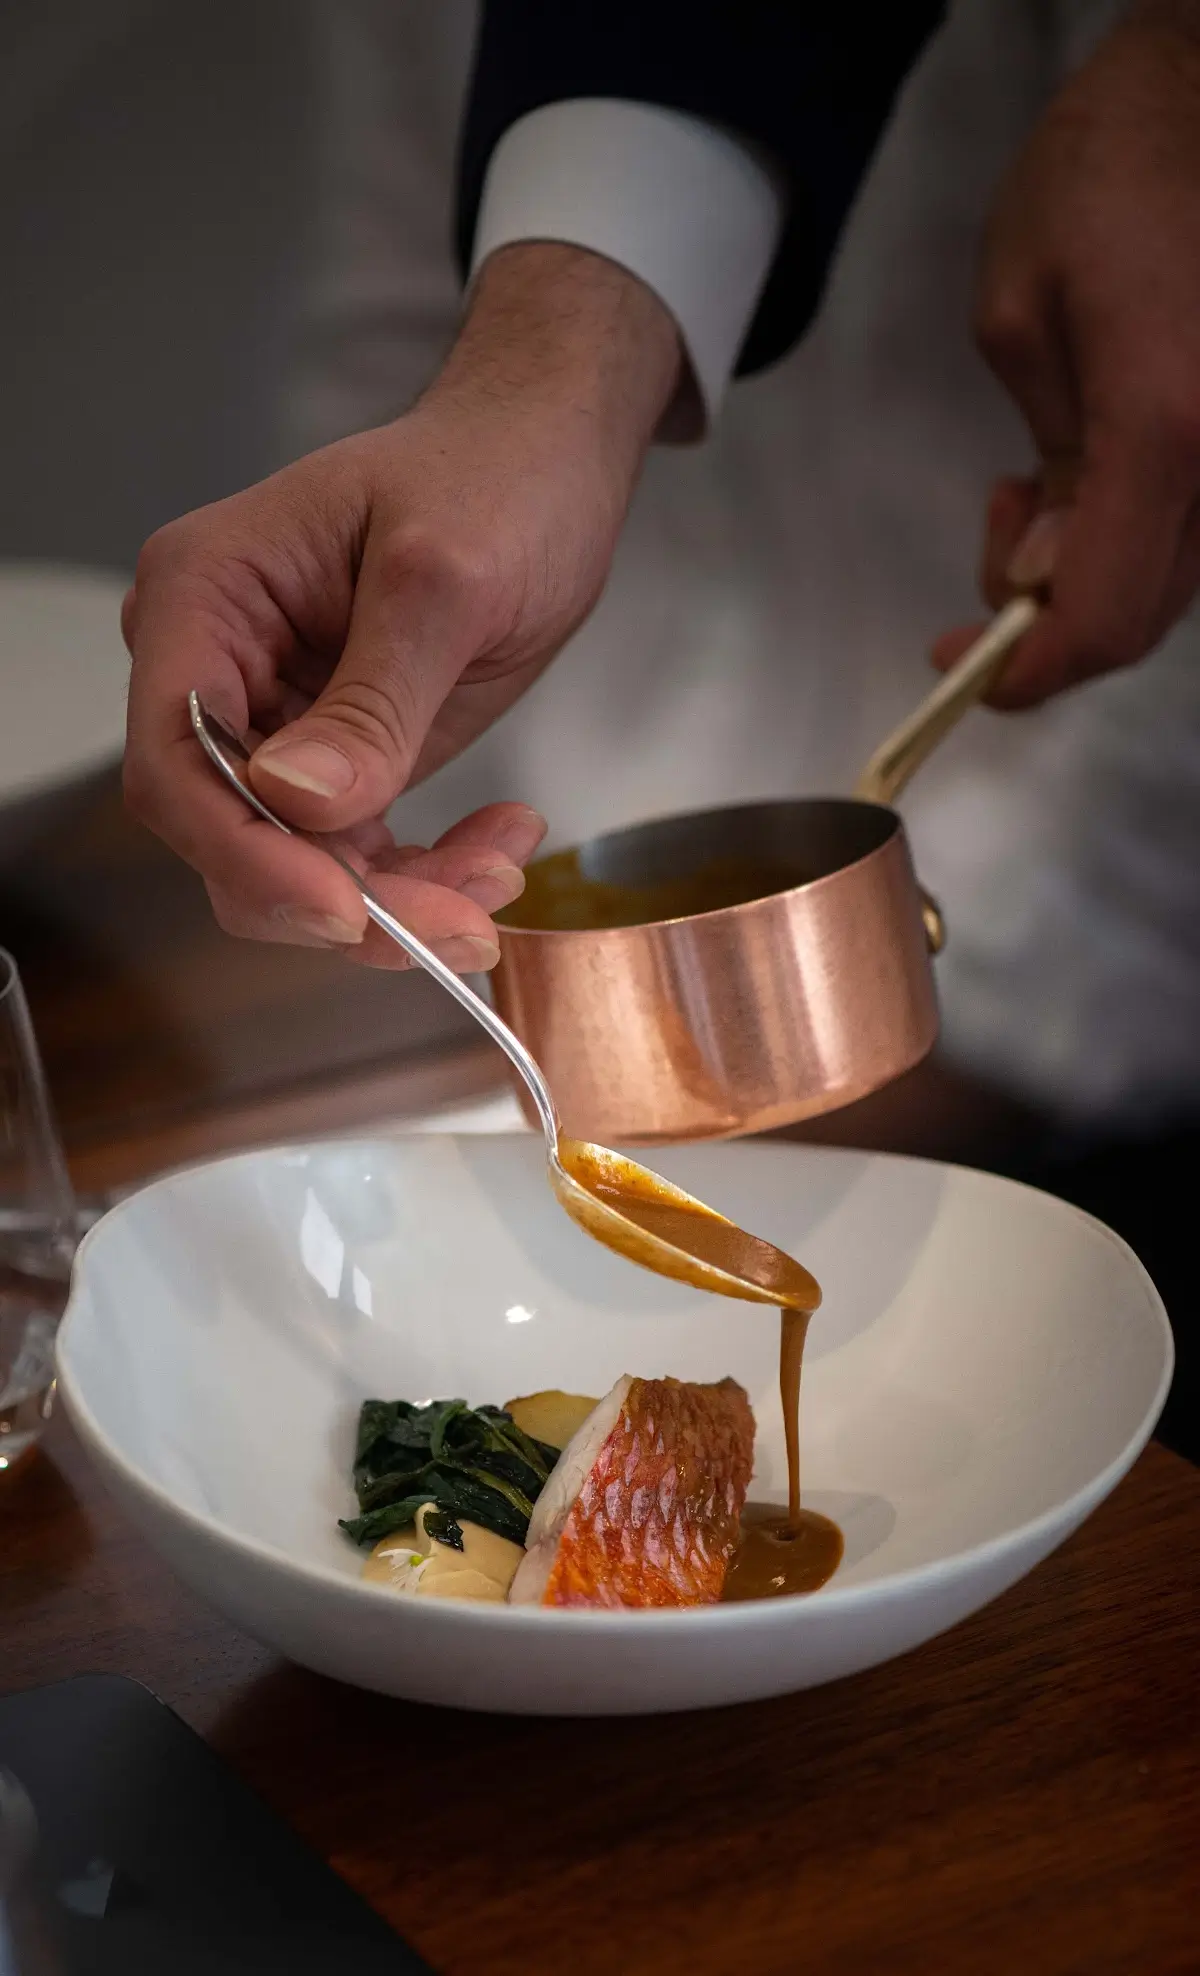 A chef pouring sauce over a gourmet dish at Automne, showcasing fine dining at an affordable Michelin star restaurant in Paris.